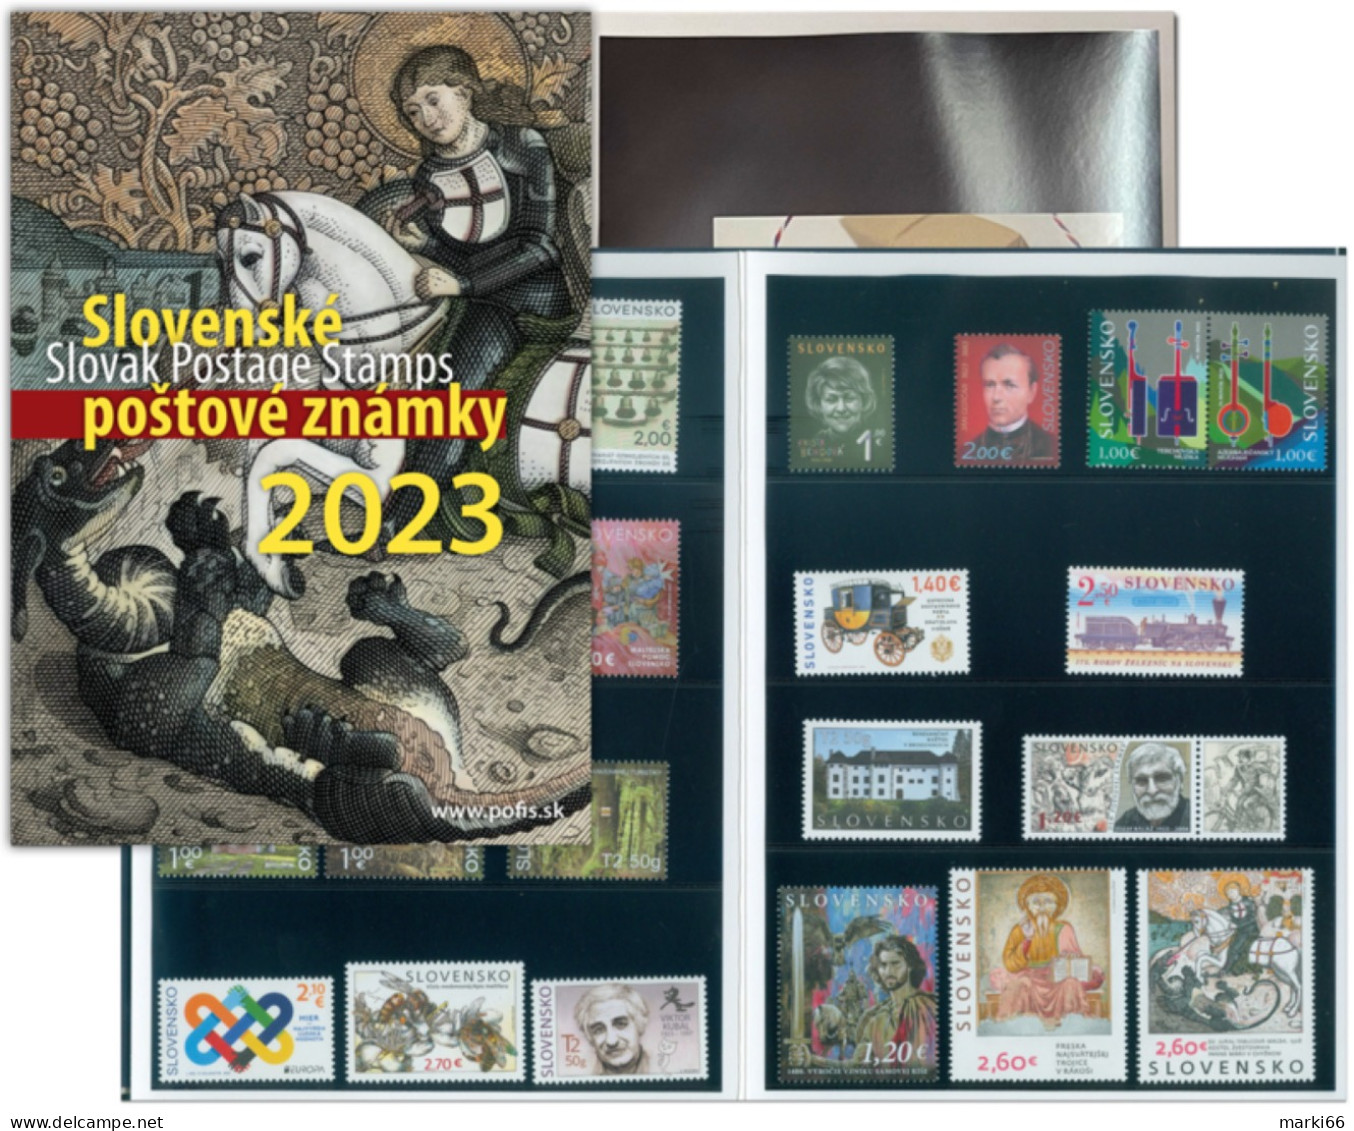 Slovakia - 2023 - Complete Annual Set - All Stamps And Souvenir Sheet Of 2023 - Volledig Jaar